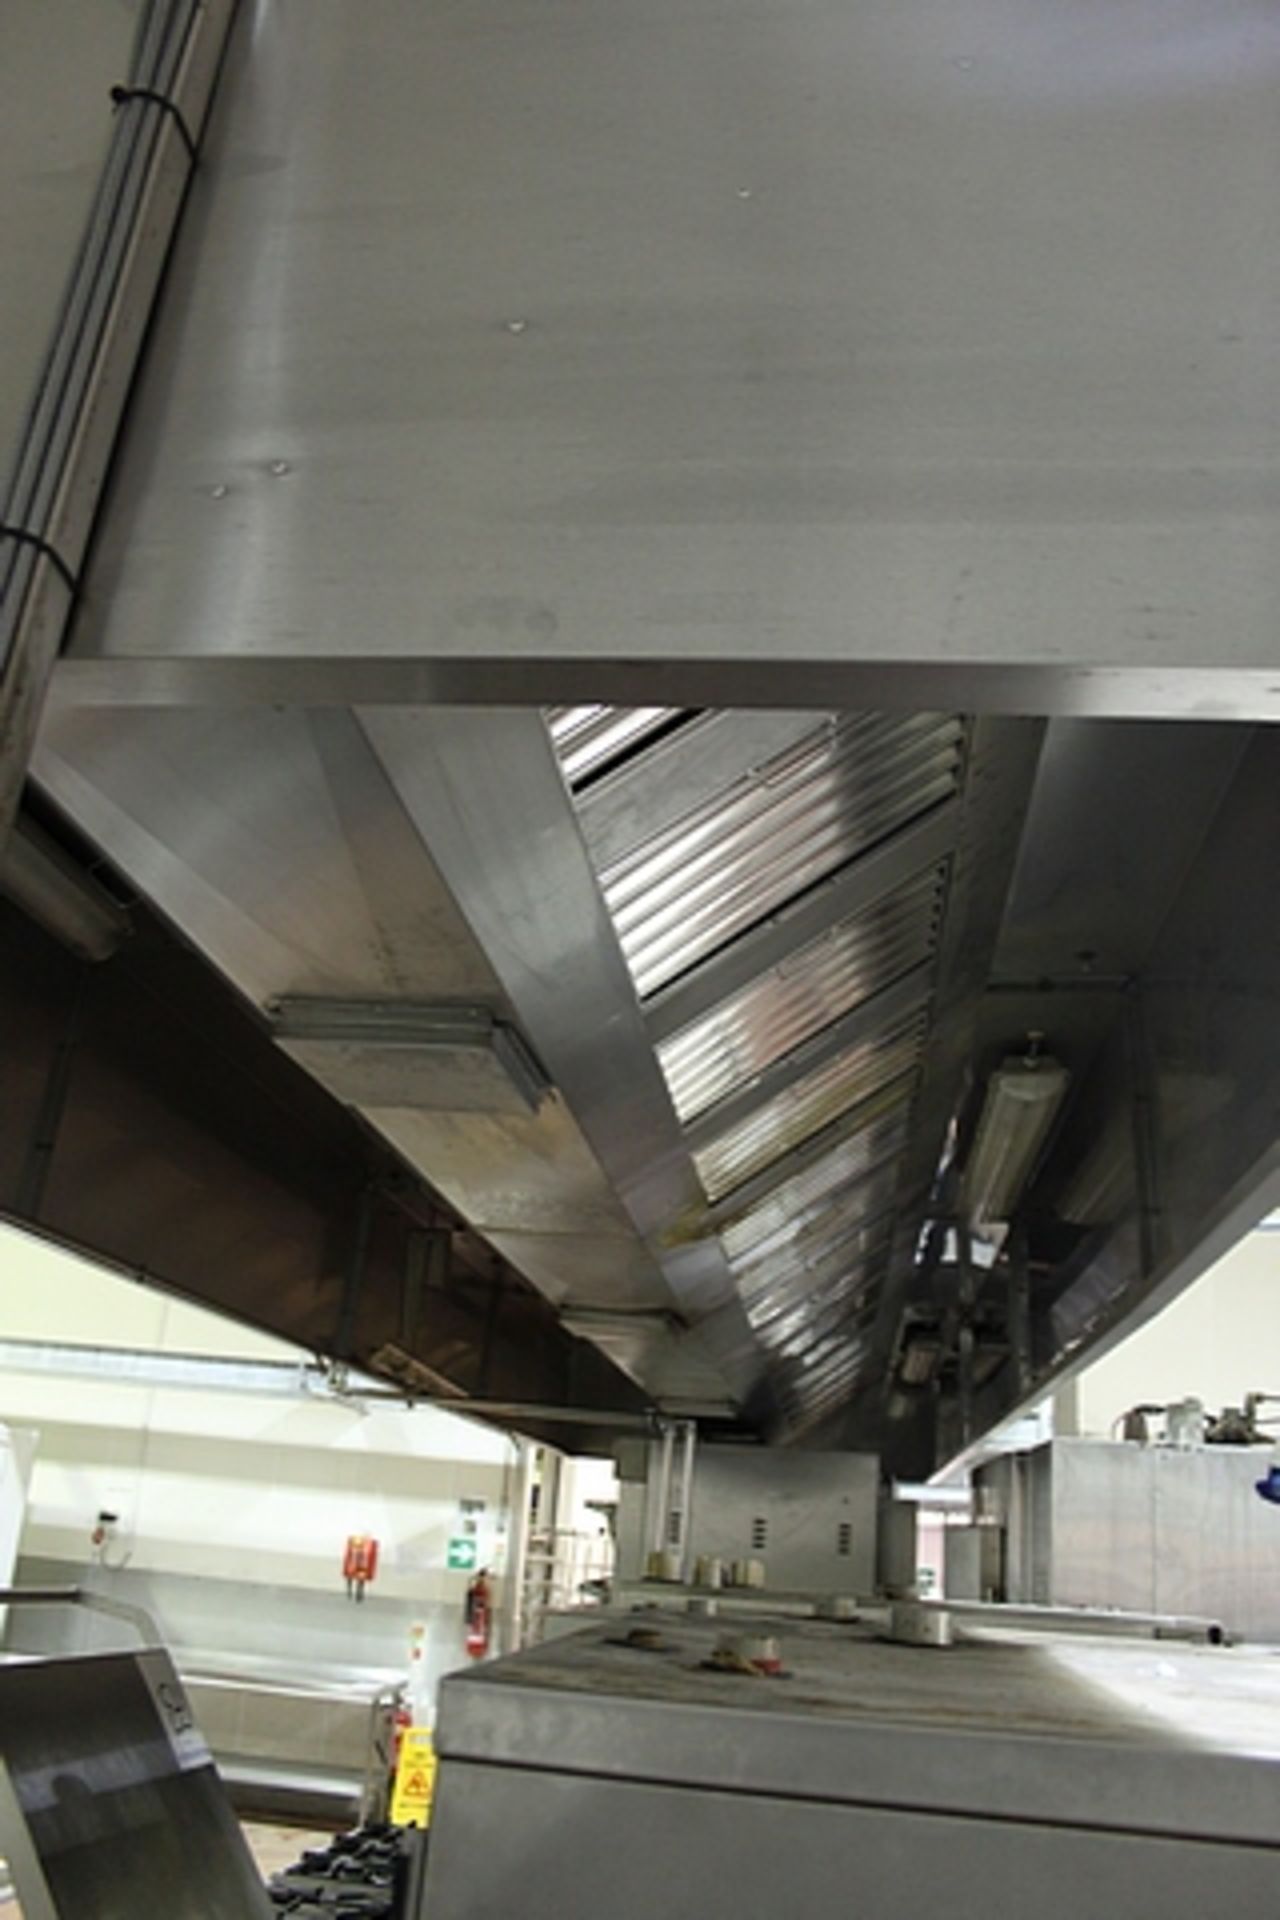 Canopy UK stainless steel commercial kitchen canopy high quality 1 mm thick 430 grade stainless - Image 2 of 4